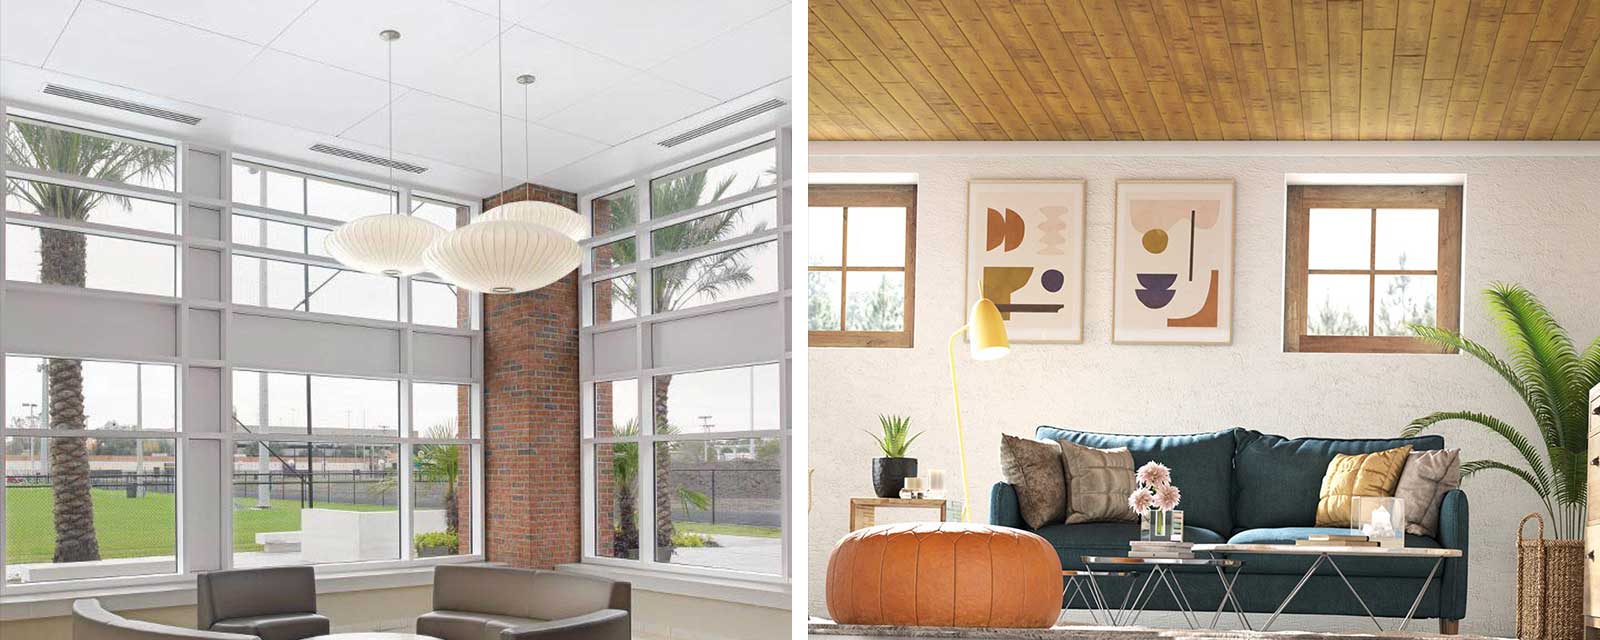 Stylish alternatives to traditional popcorn ceilings